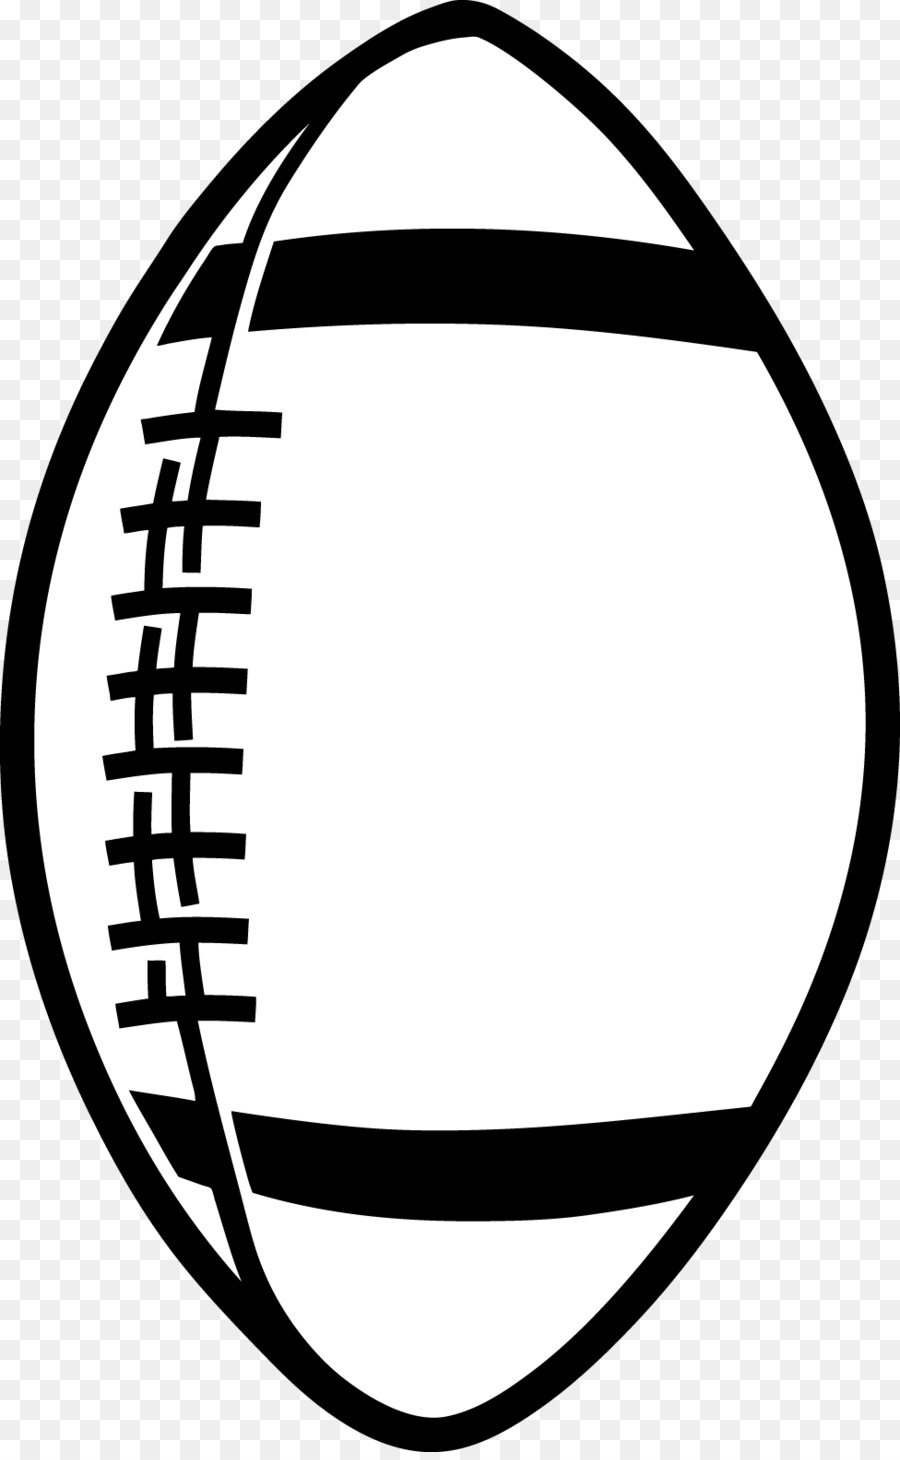 American football Black and white Clip art - Dragonfly Outline png download - 976*1575 - Free Transparent American Football png Download.